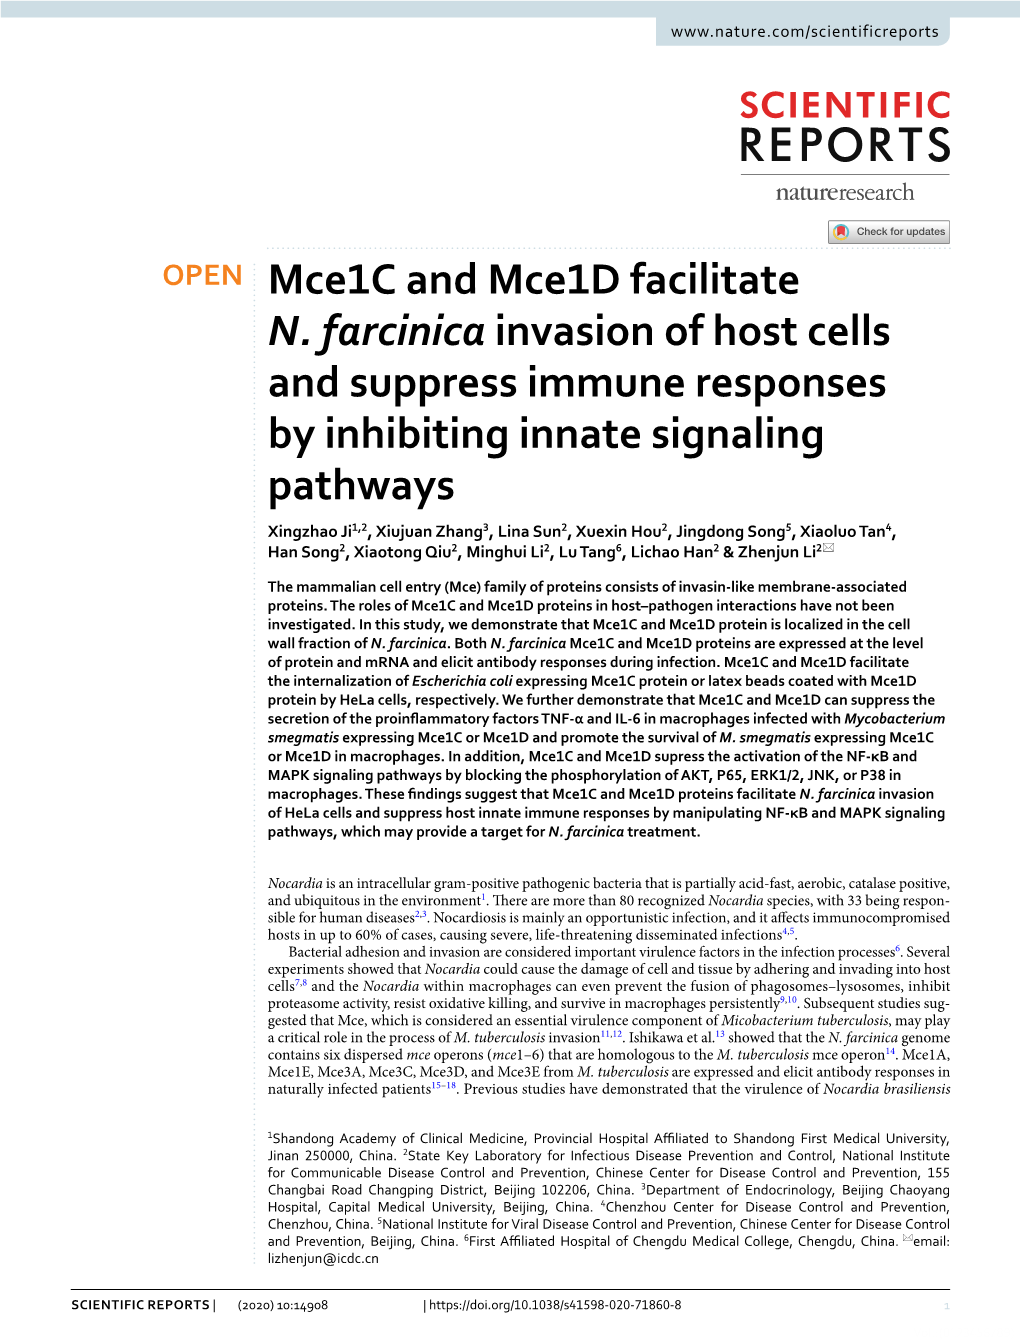 Mce1c and Mce1d Facilitate N. Farcinica Invasion of Host Cells And